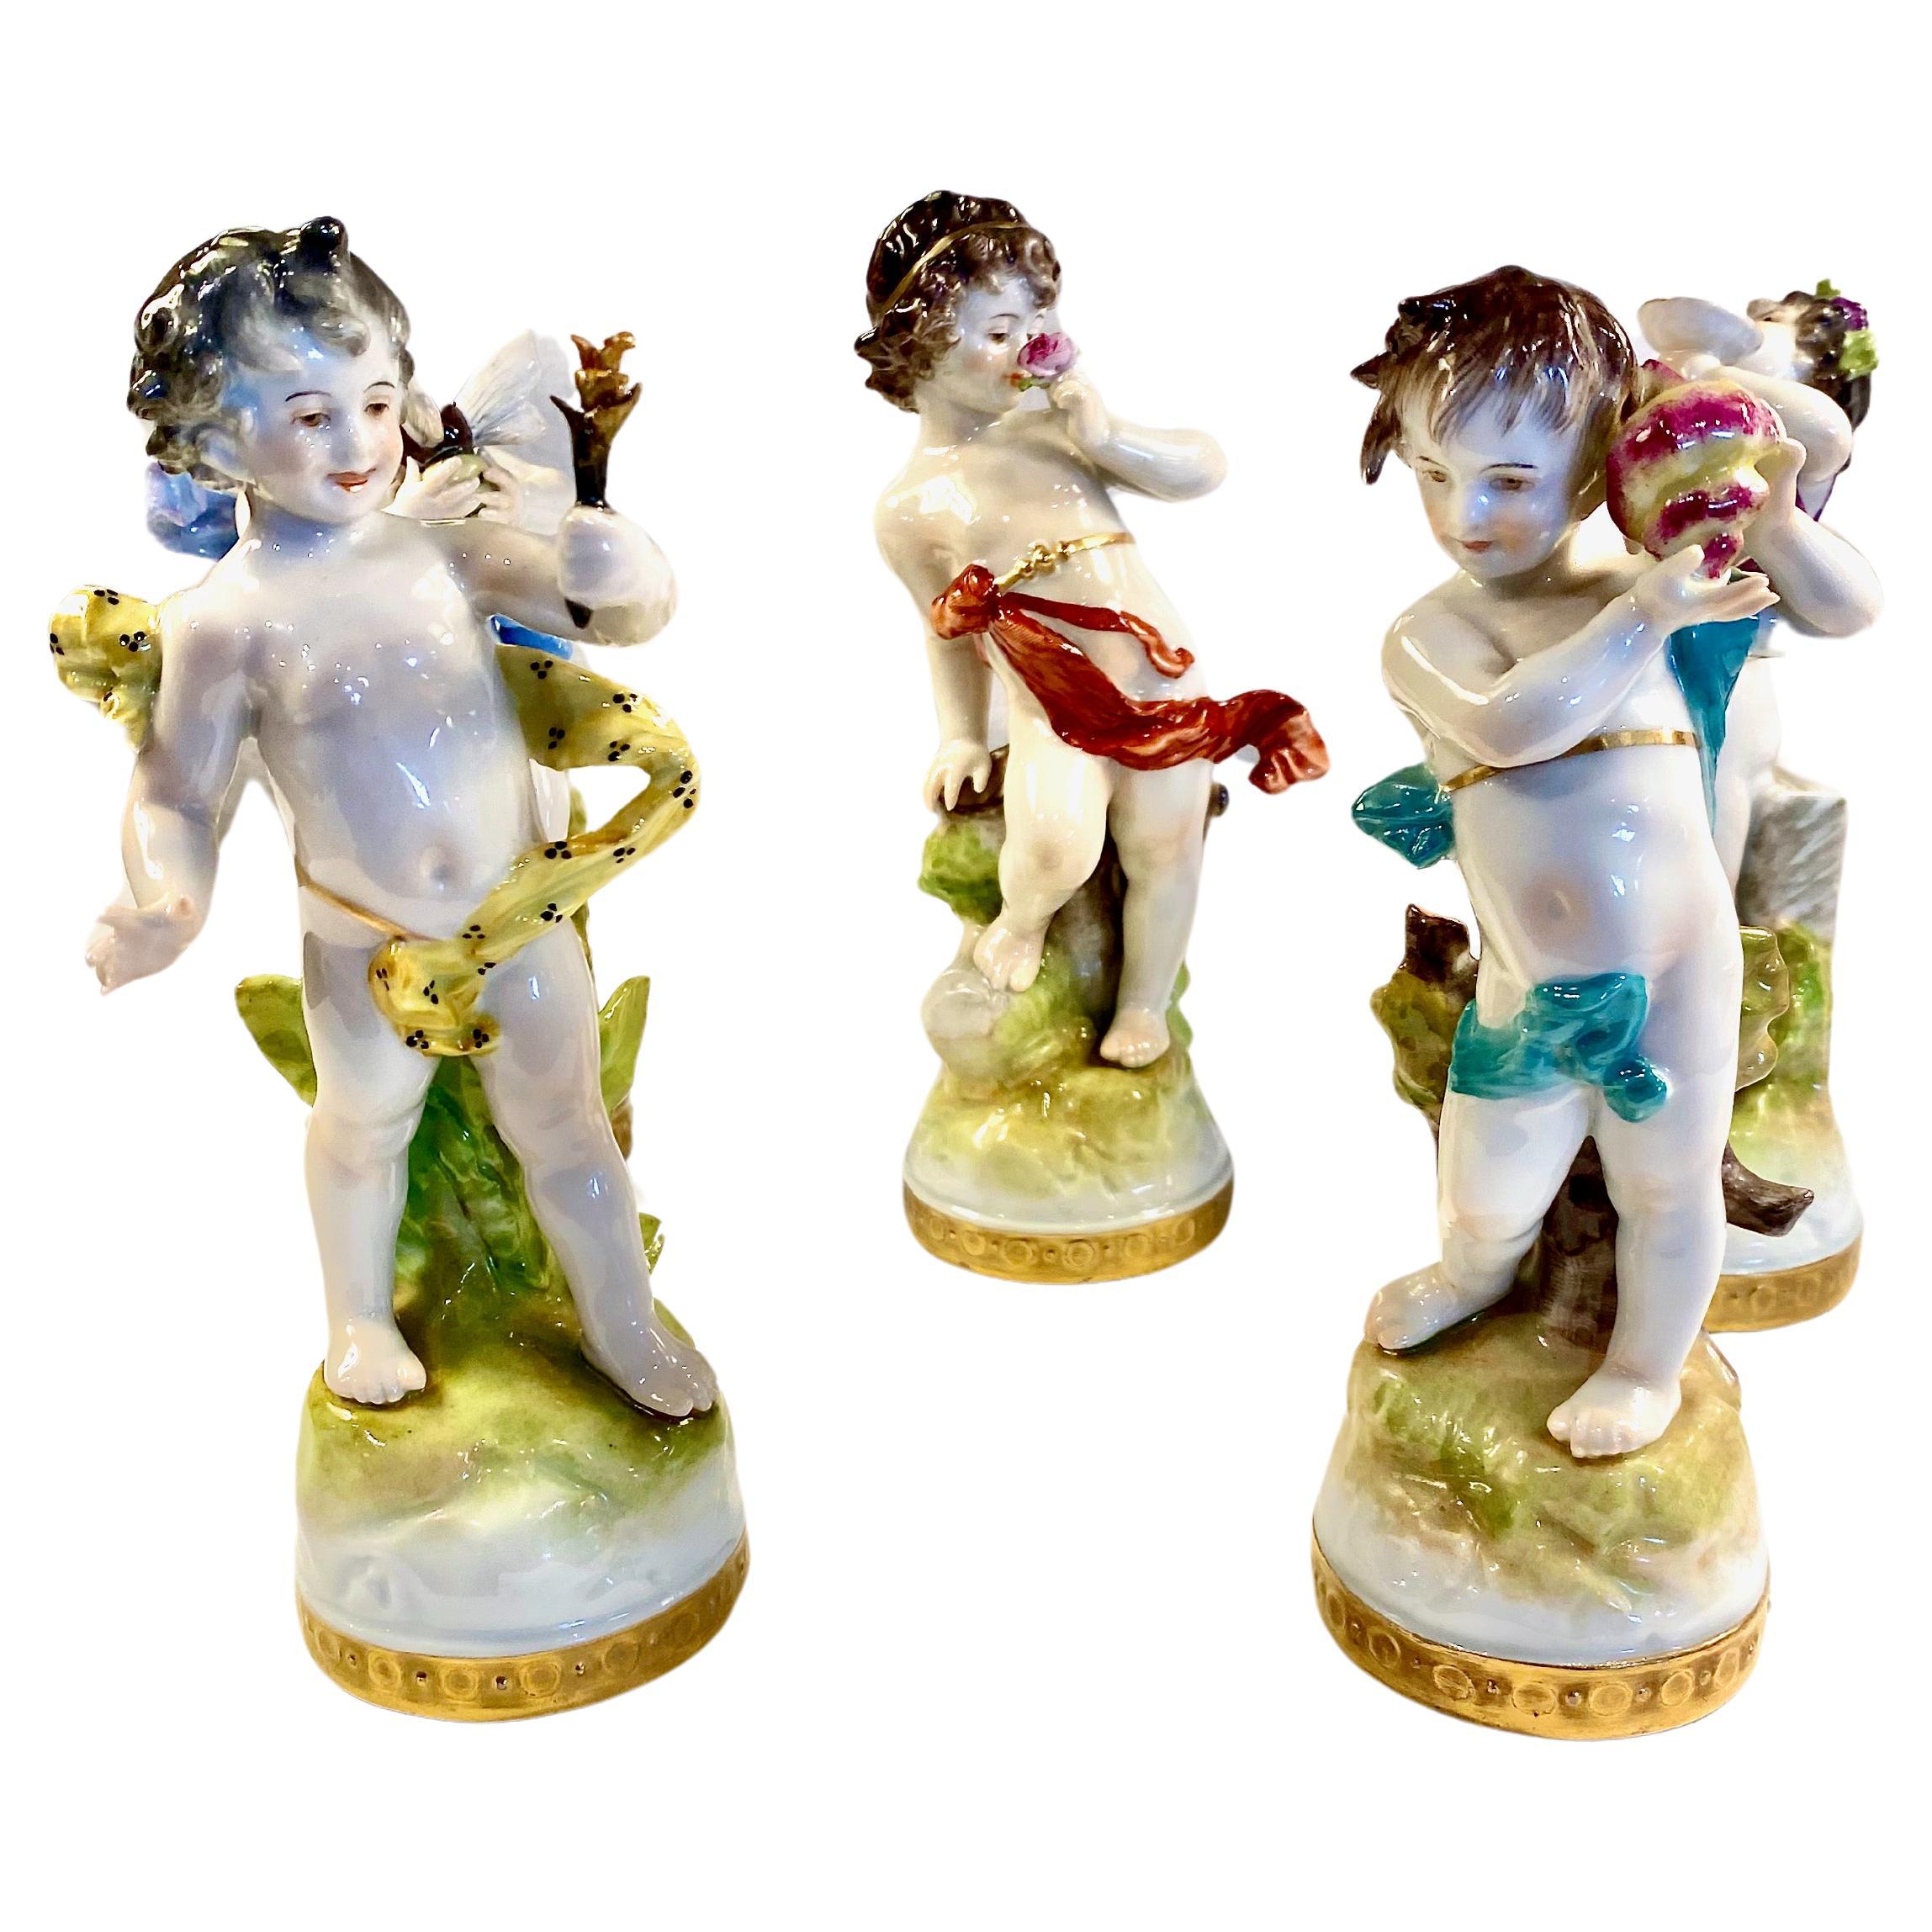 This is a set of 5 Rudolstadt Volkstedt Figurines representing various putti or cupids. The figurines are beautifully detailed with hand painting, scrolling drapery and holding flowers, a shell and even a bee. All five pieces are in very good